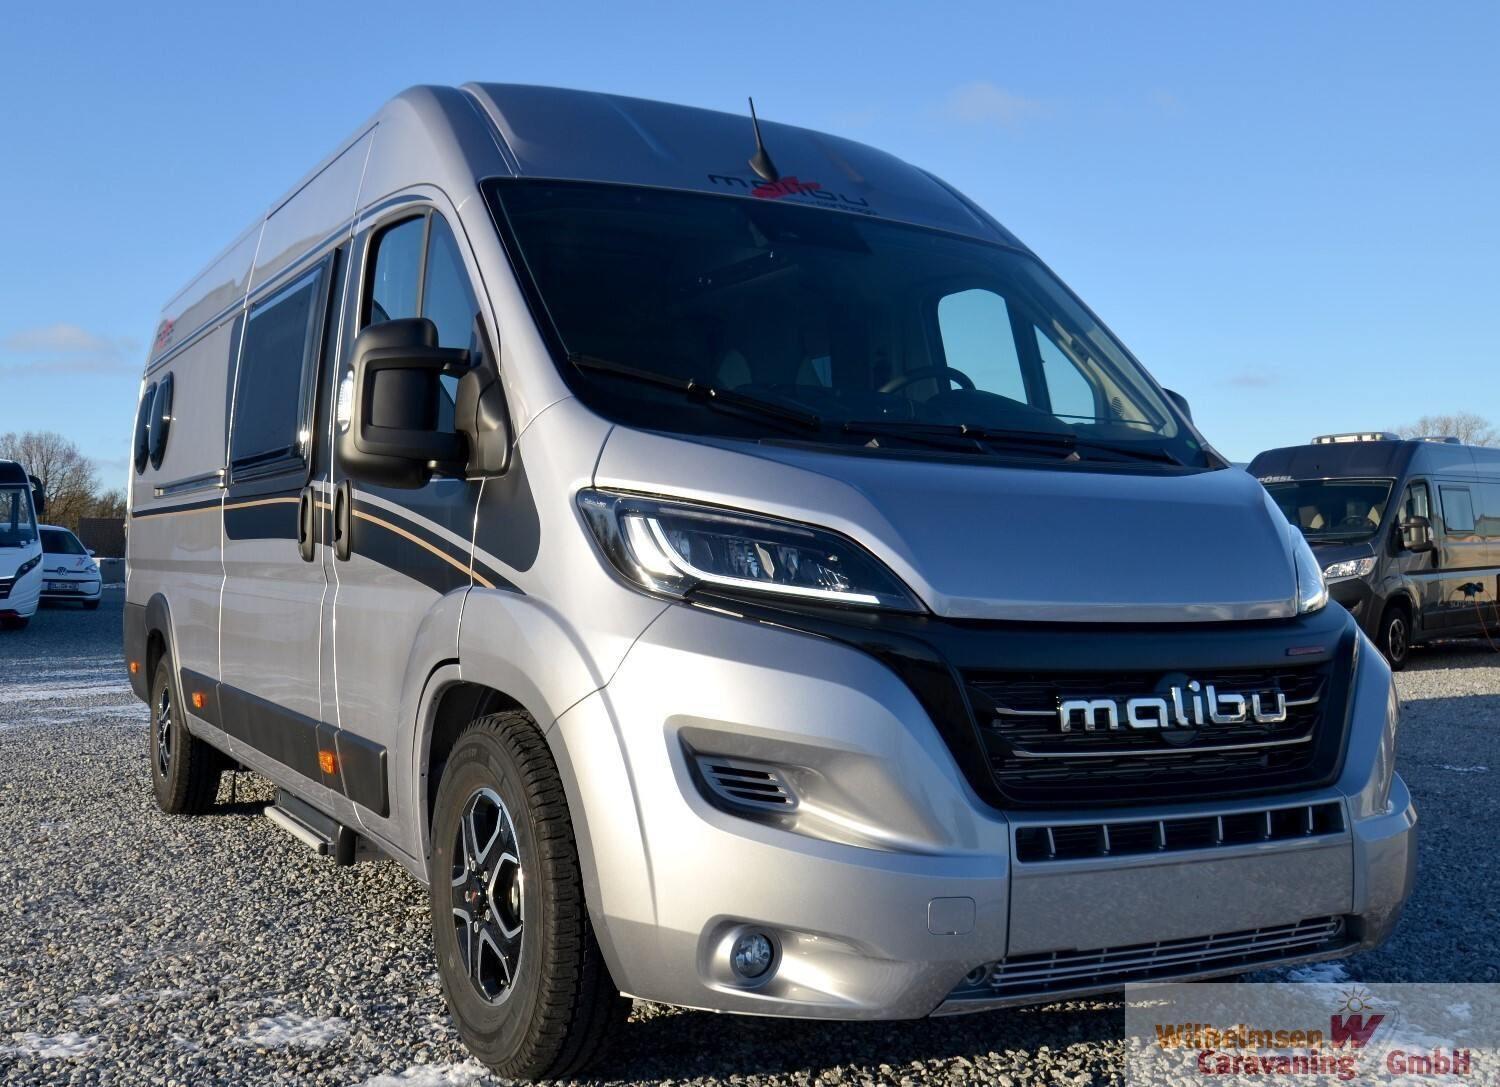 Wohnmobil 🚐 Malibu Van first class - two rooms 640 LE RB kaufen